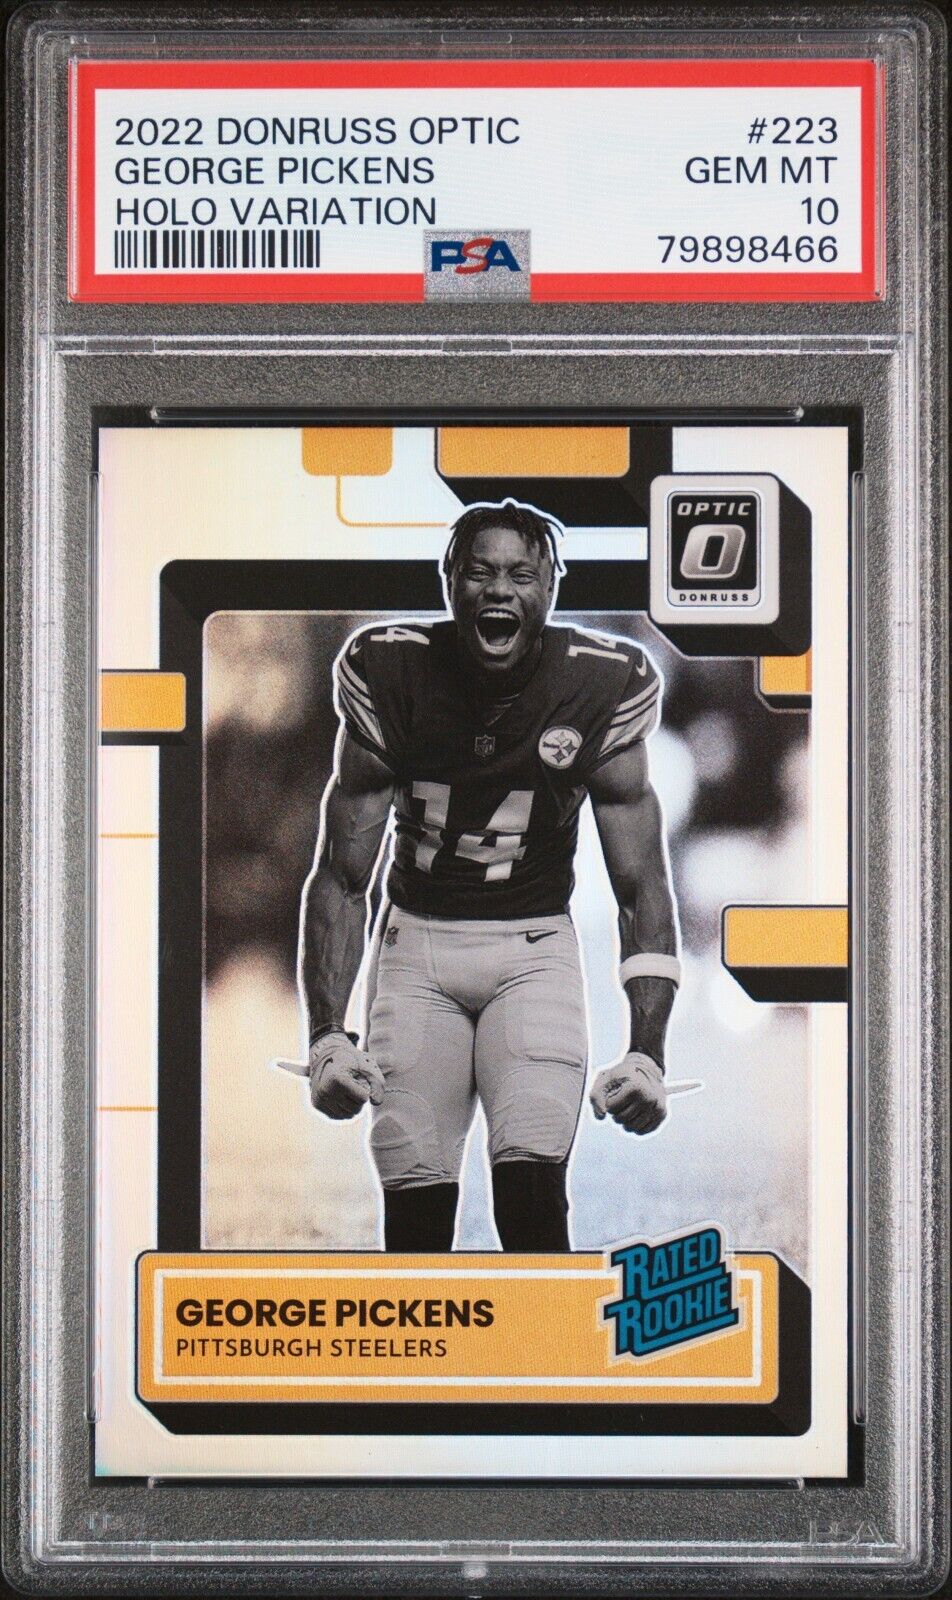 2022 Donruss Optic George Pickens 223 Holo Variation Rated Rookie PSA 10 PIT